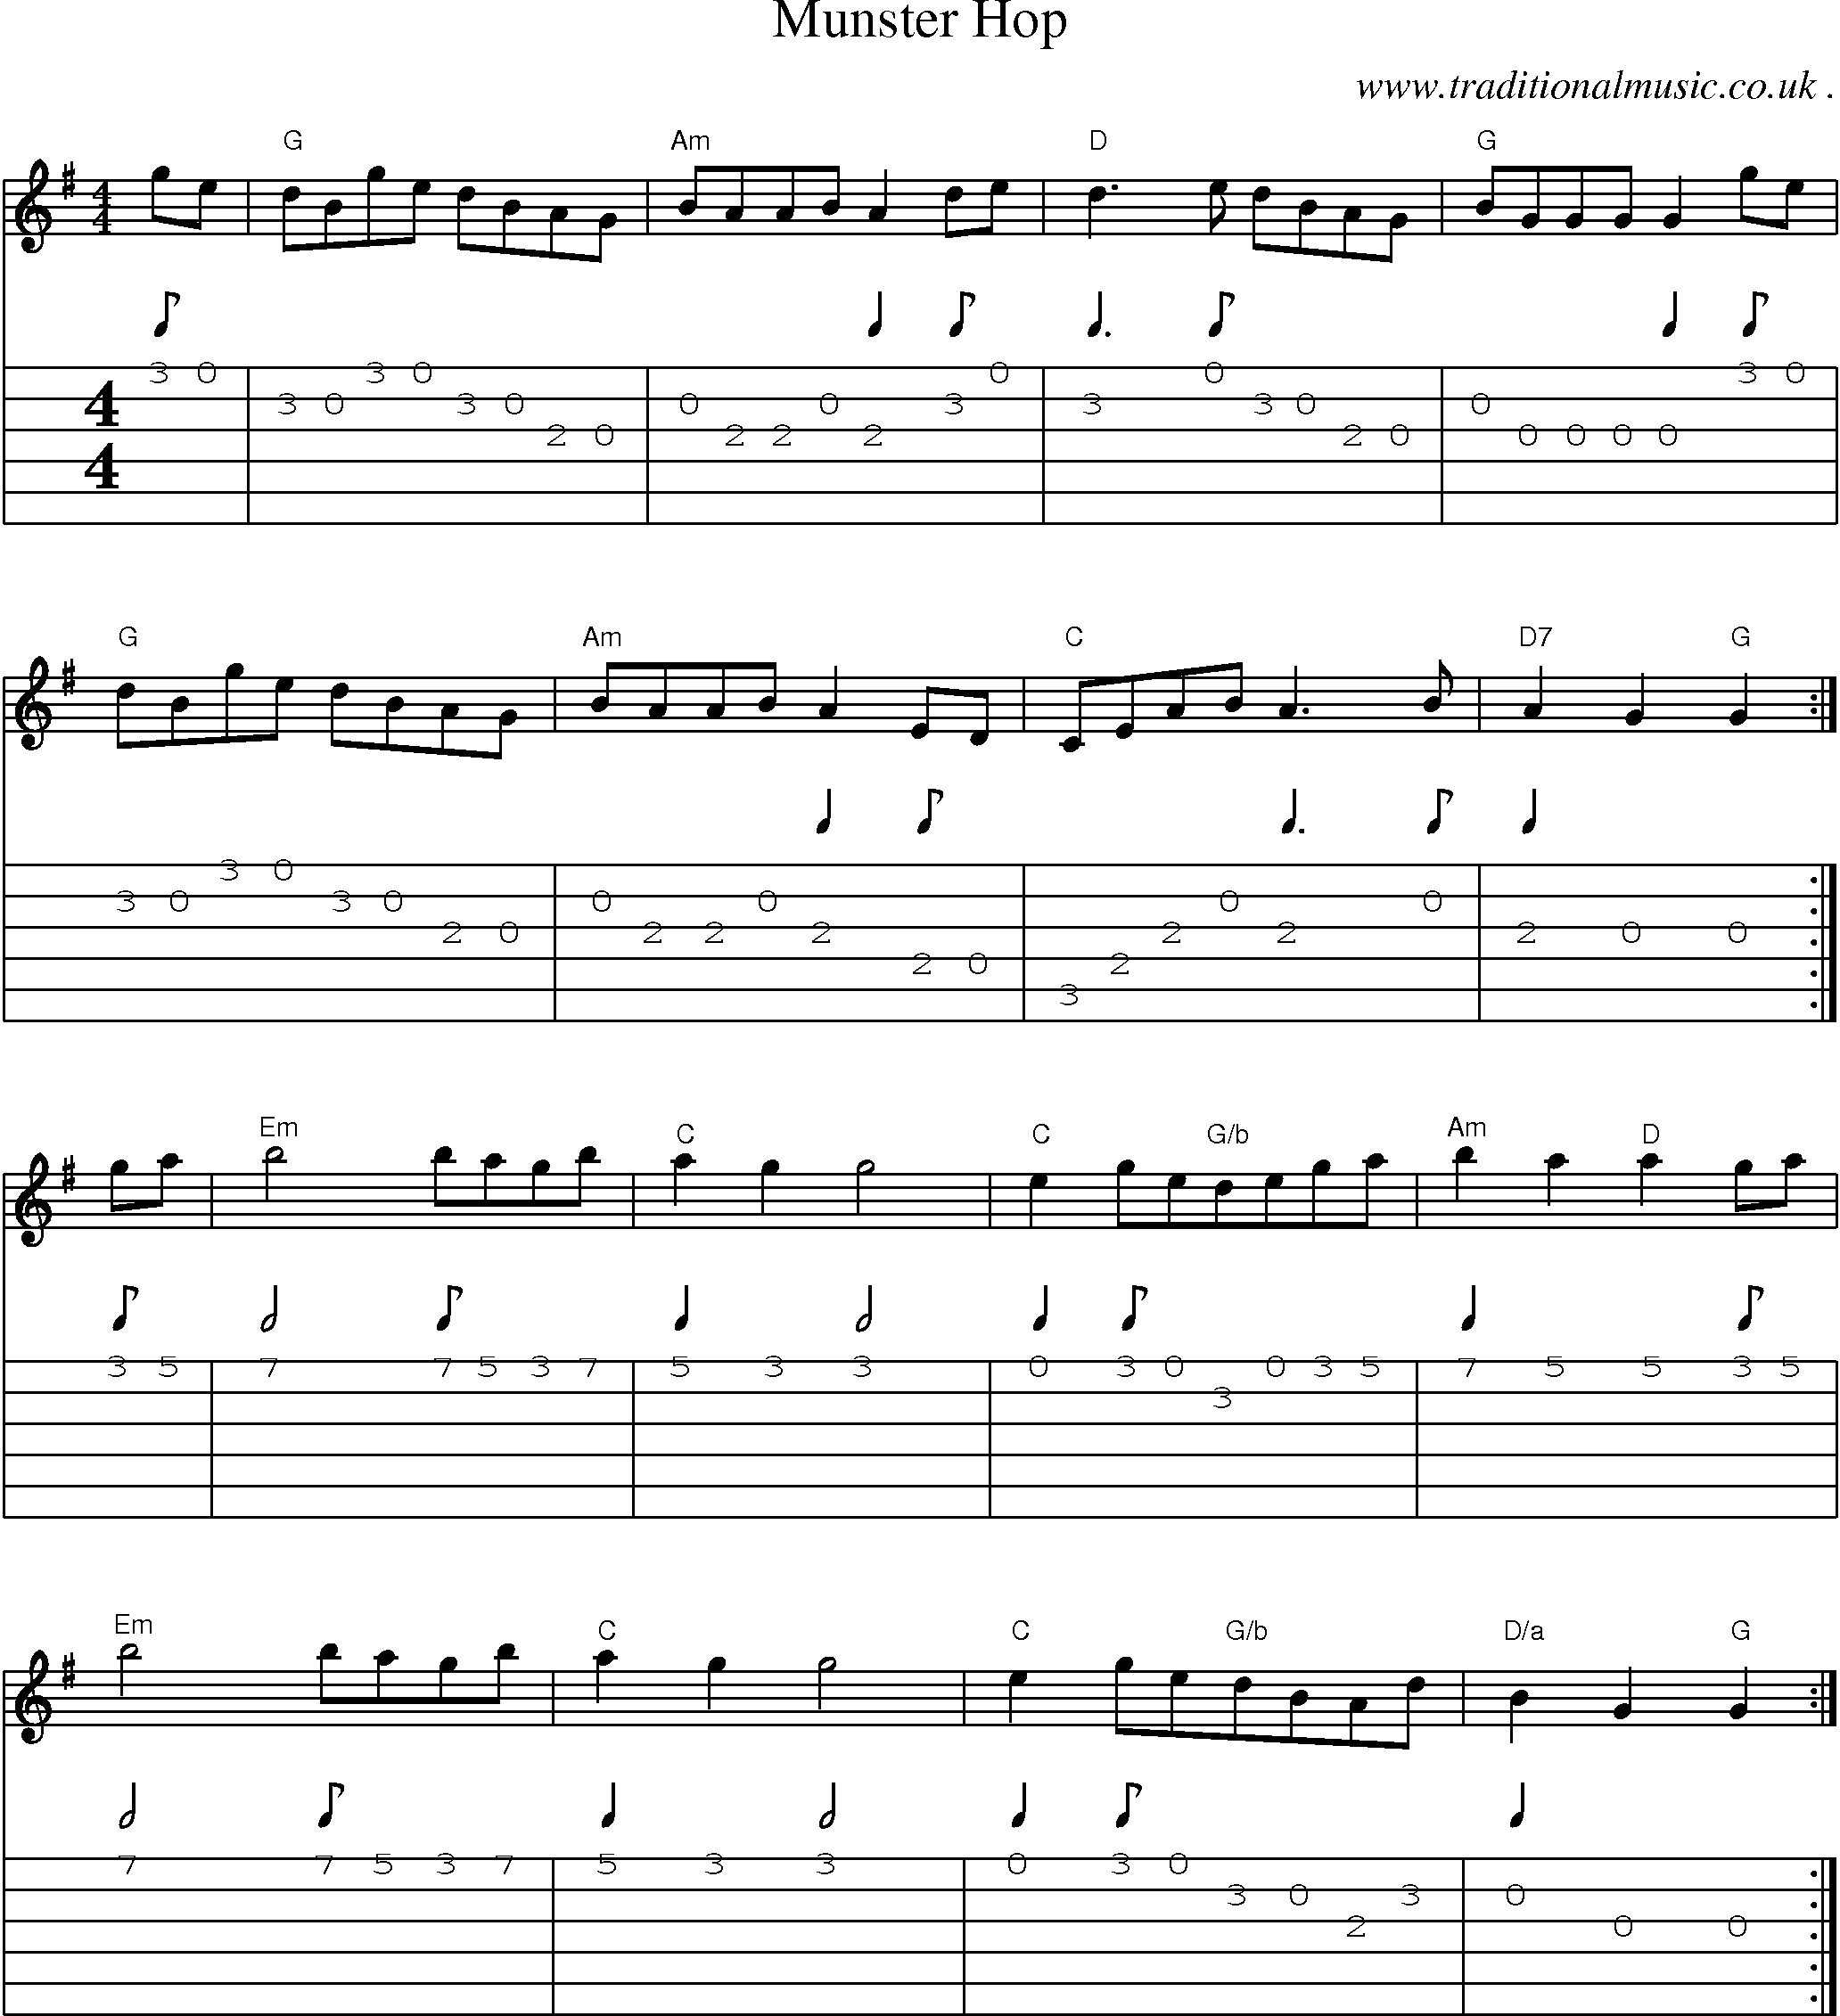 Sheet-Music and Guitar Tabs for Munster Hop